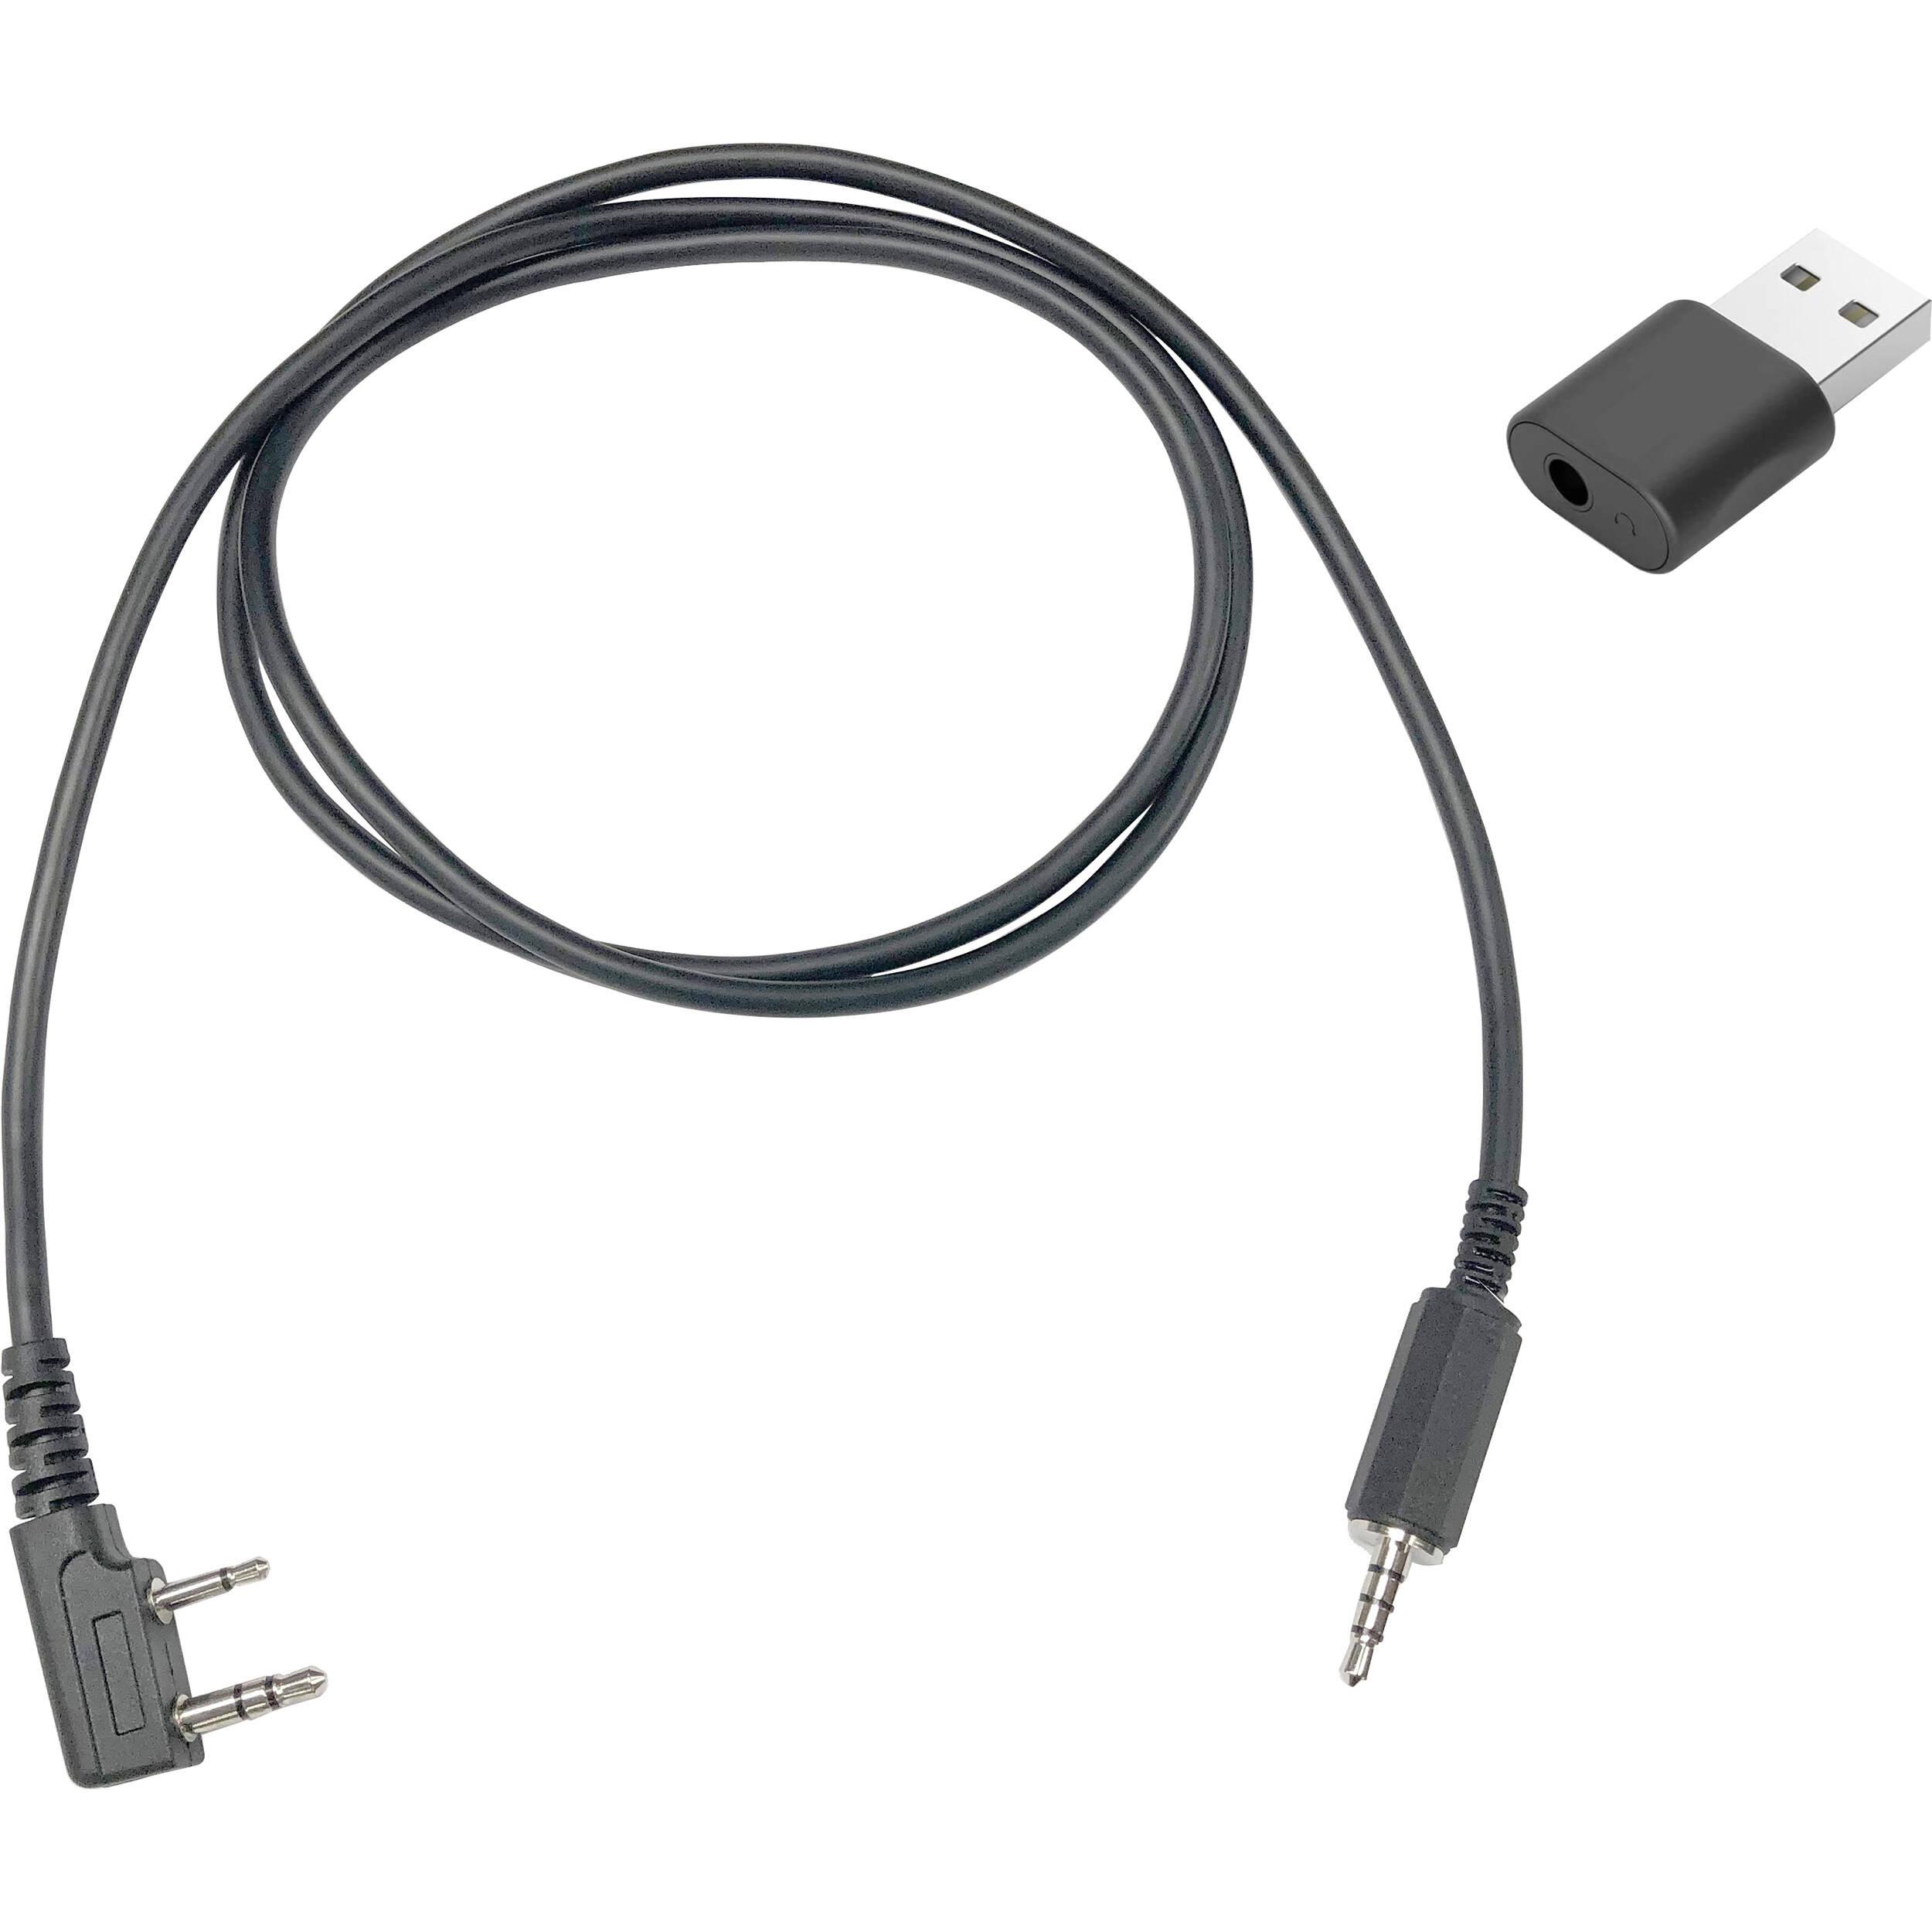 Eartec TRRS Cable and USB Sound Card